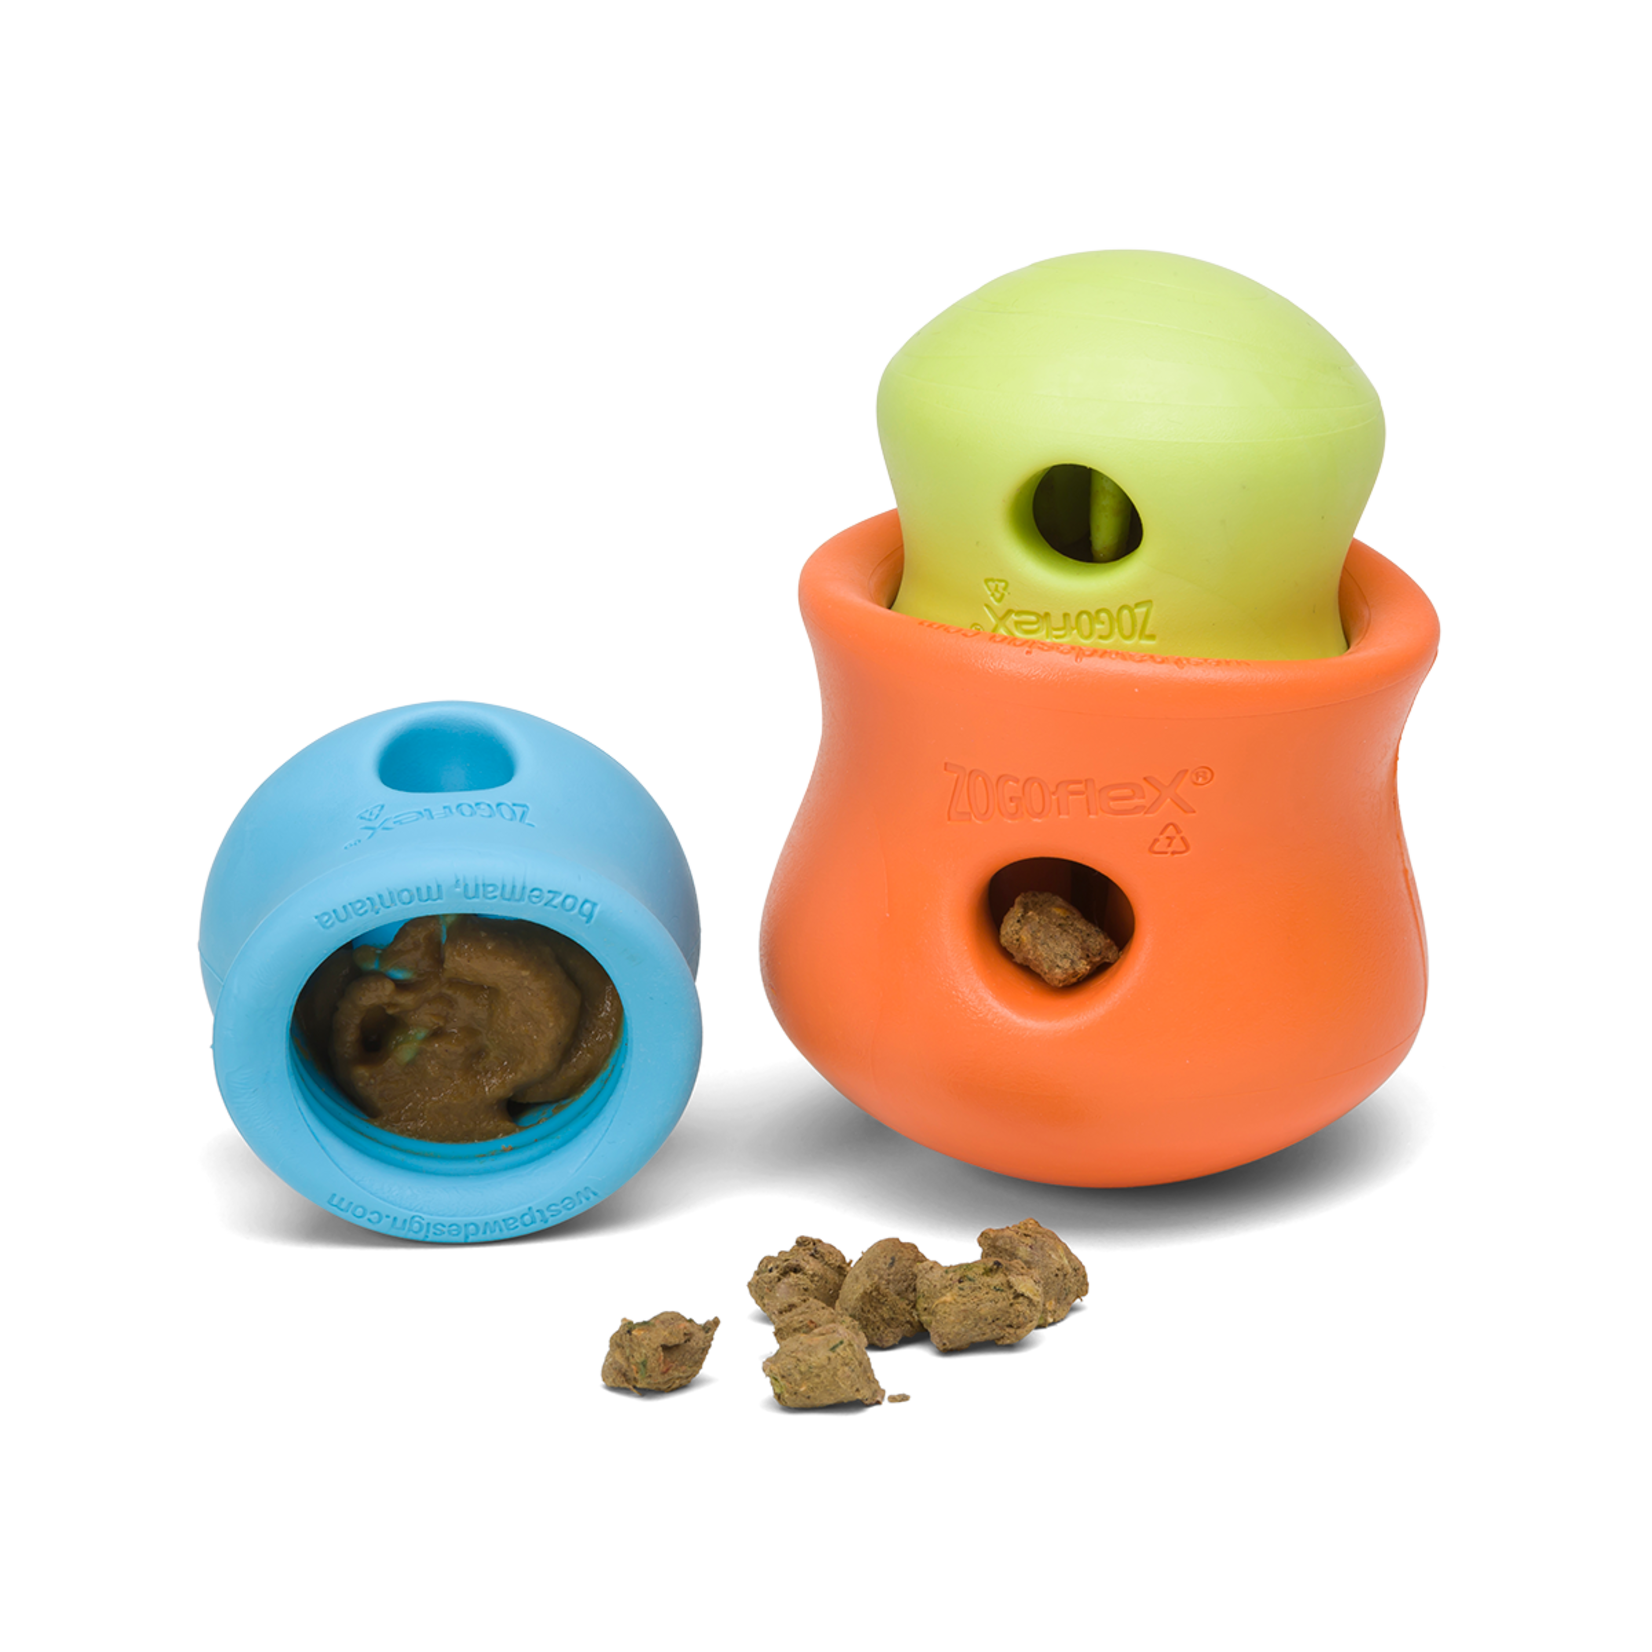 West Paw Toppl Small 3" - Green dog toy/treat dispenser